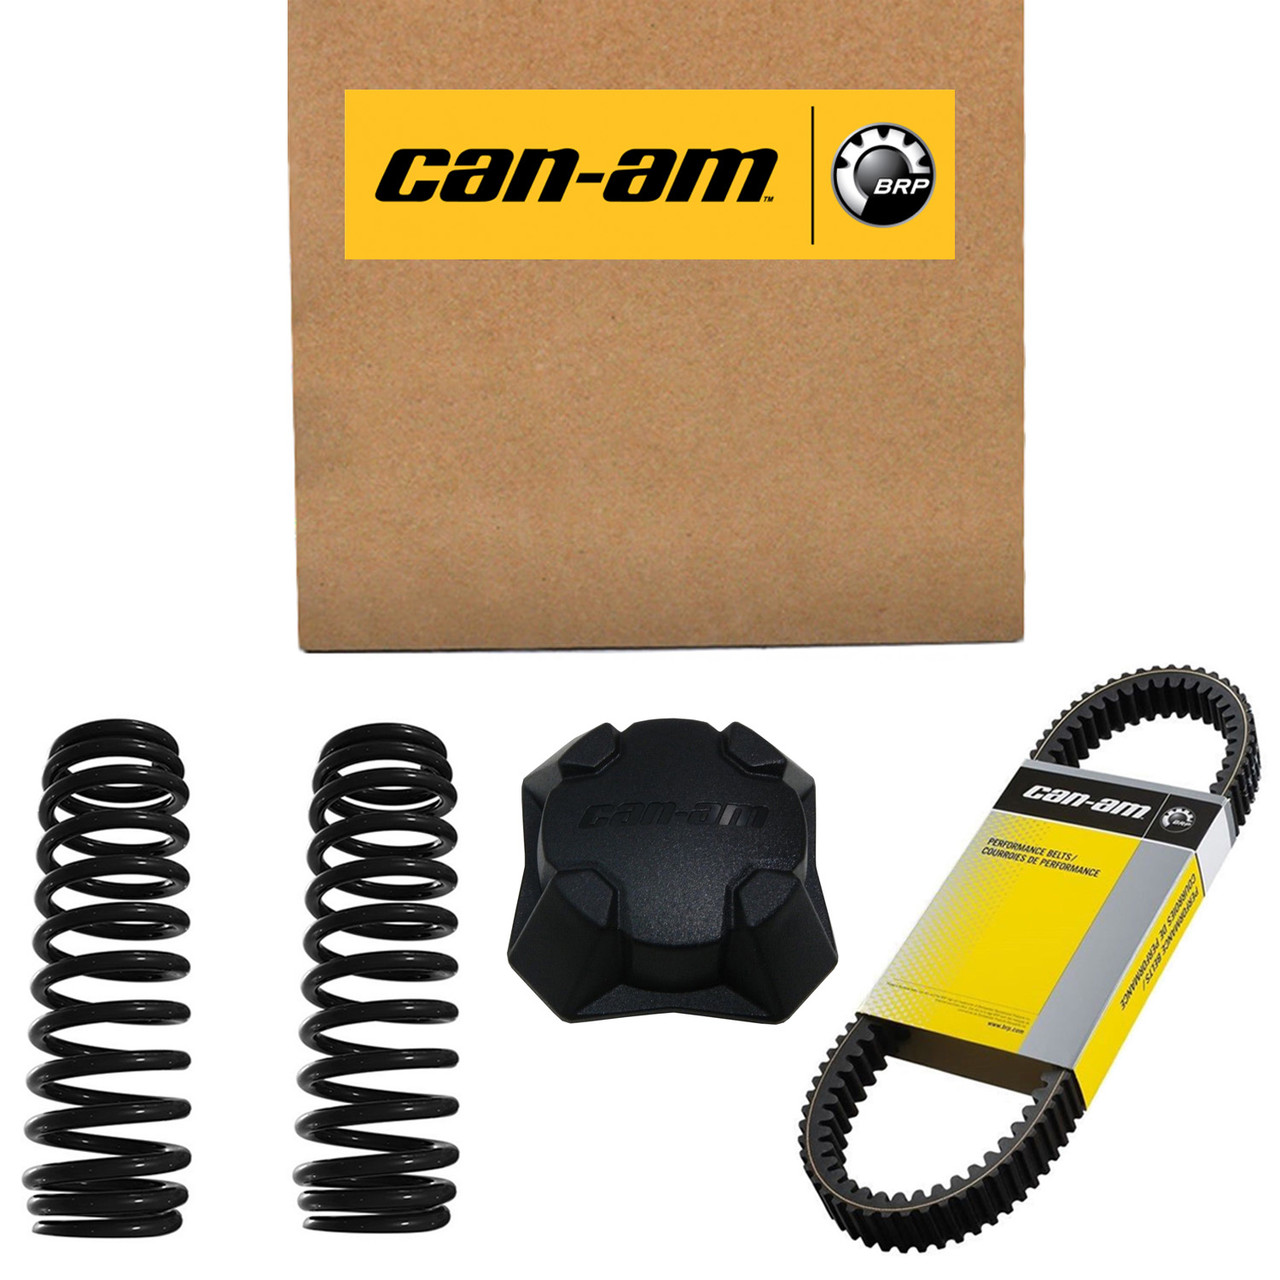 Can-Am New OEM Protection Shield, 420651020